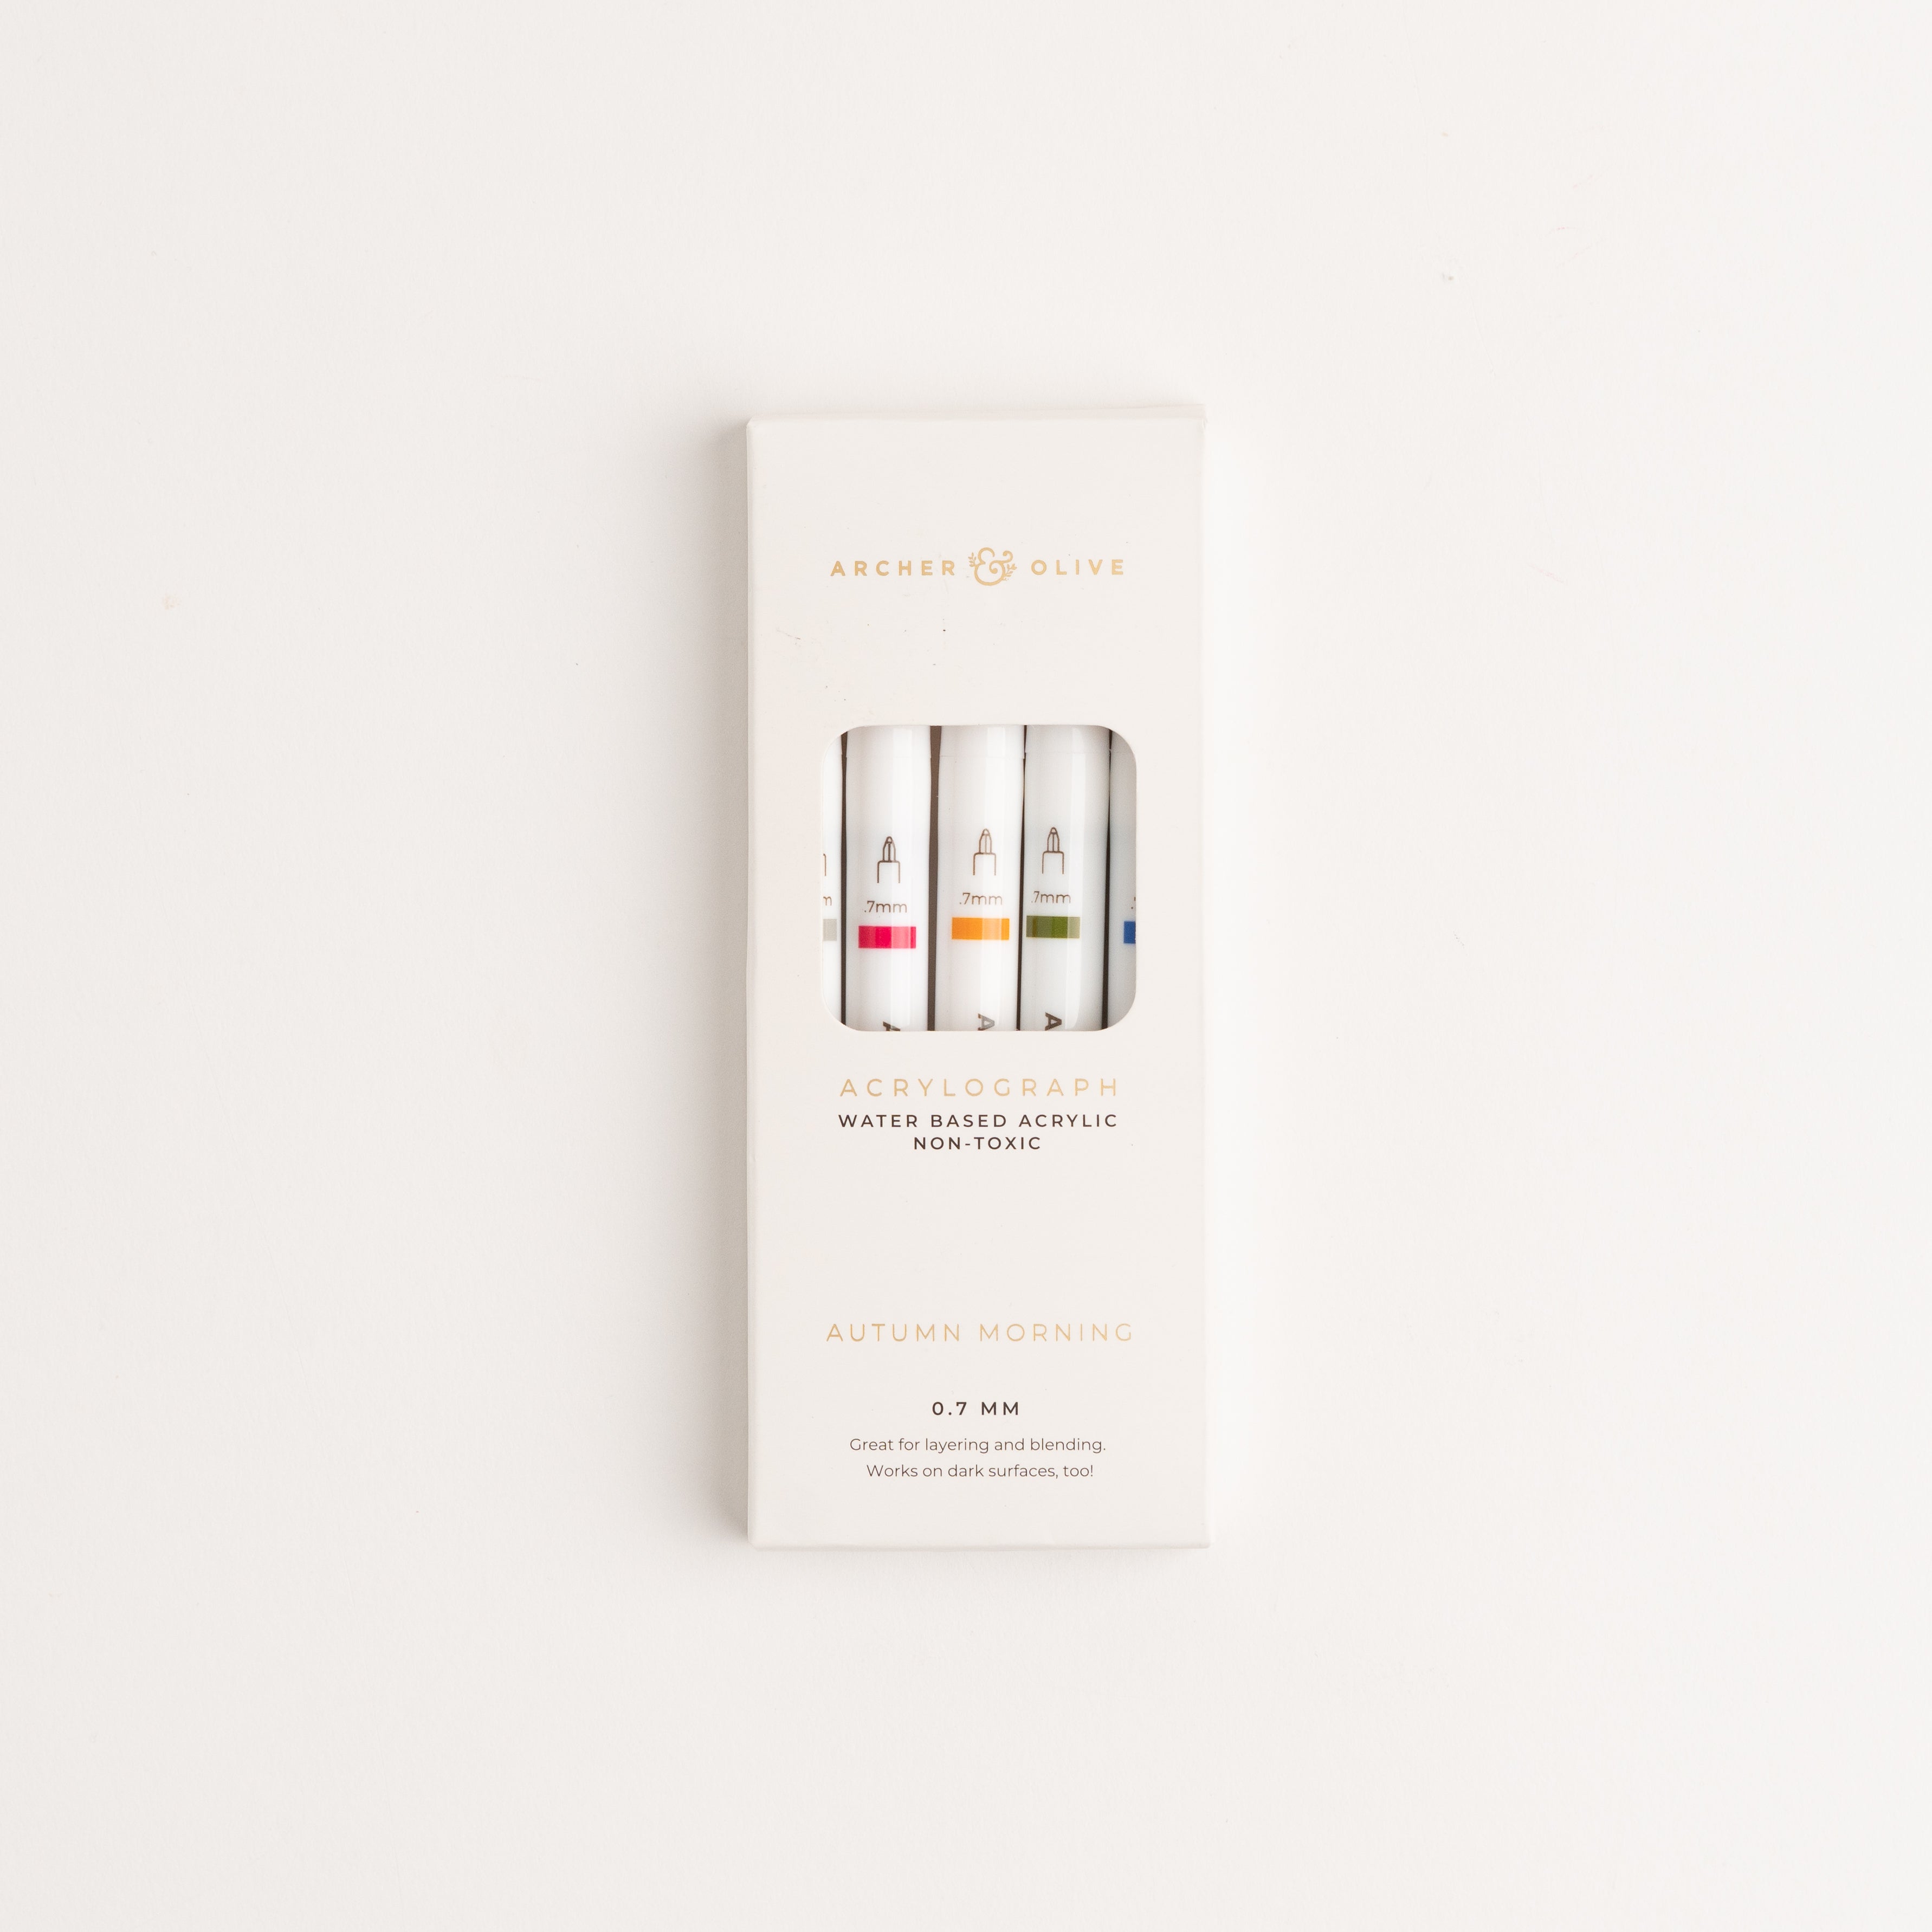 Calliograph Pens Sunset Breeze - 5 Pack by Archer and Olive